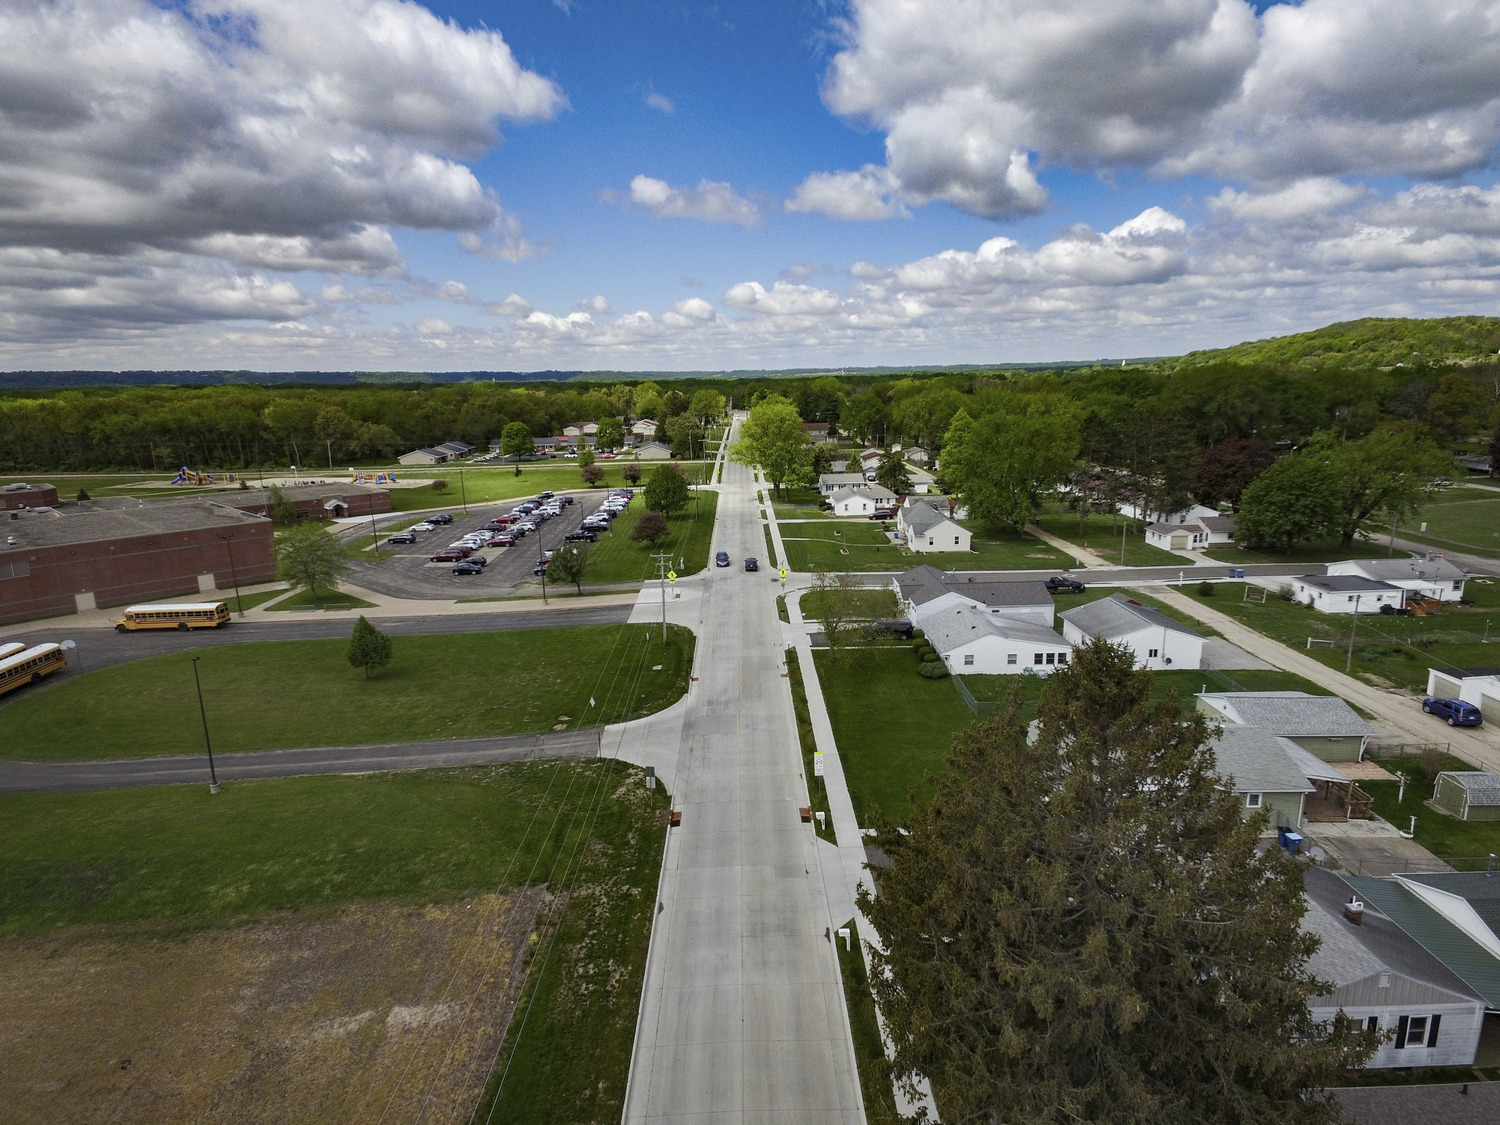 Drone photograph of reconstructed Wacker Road in Savanna, Illinois, with improved surface, ADA compliance, school access and utilities.